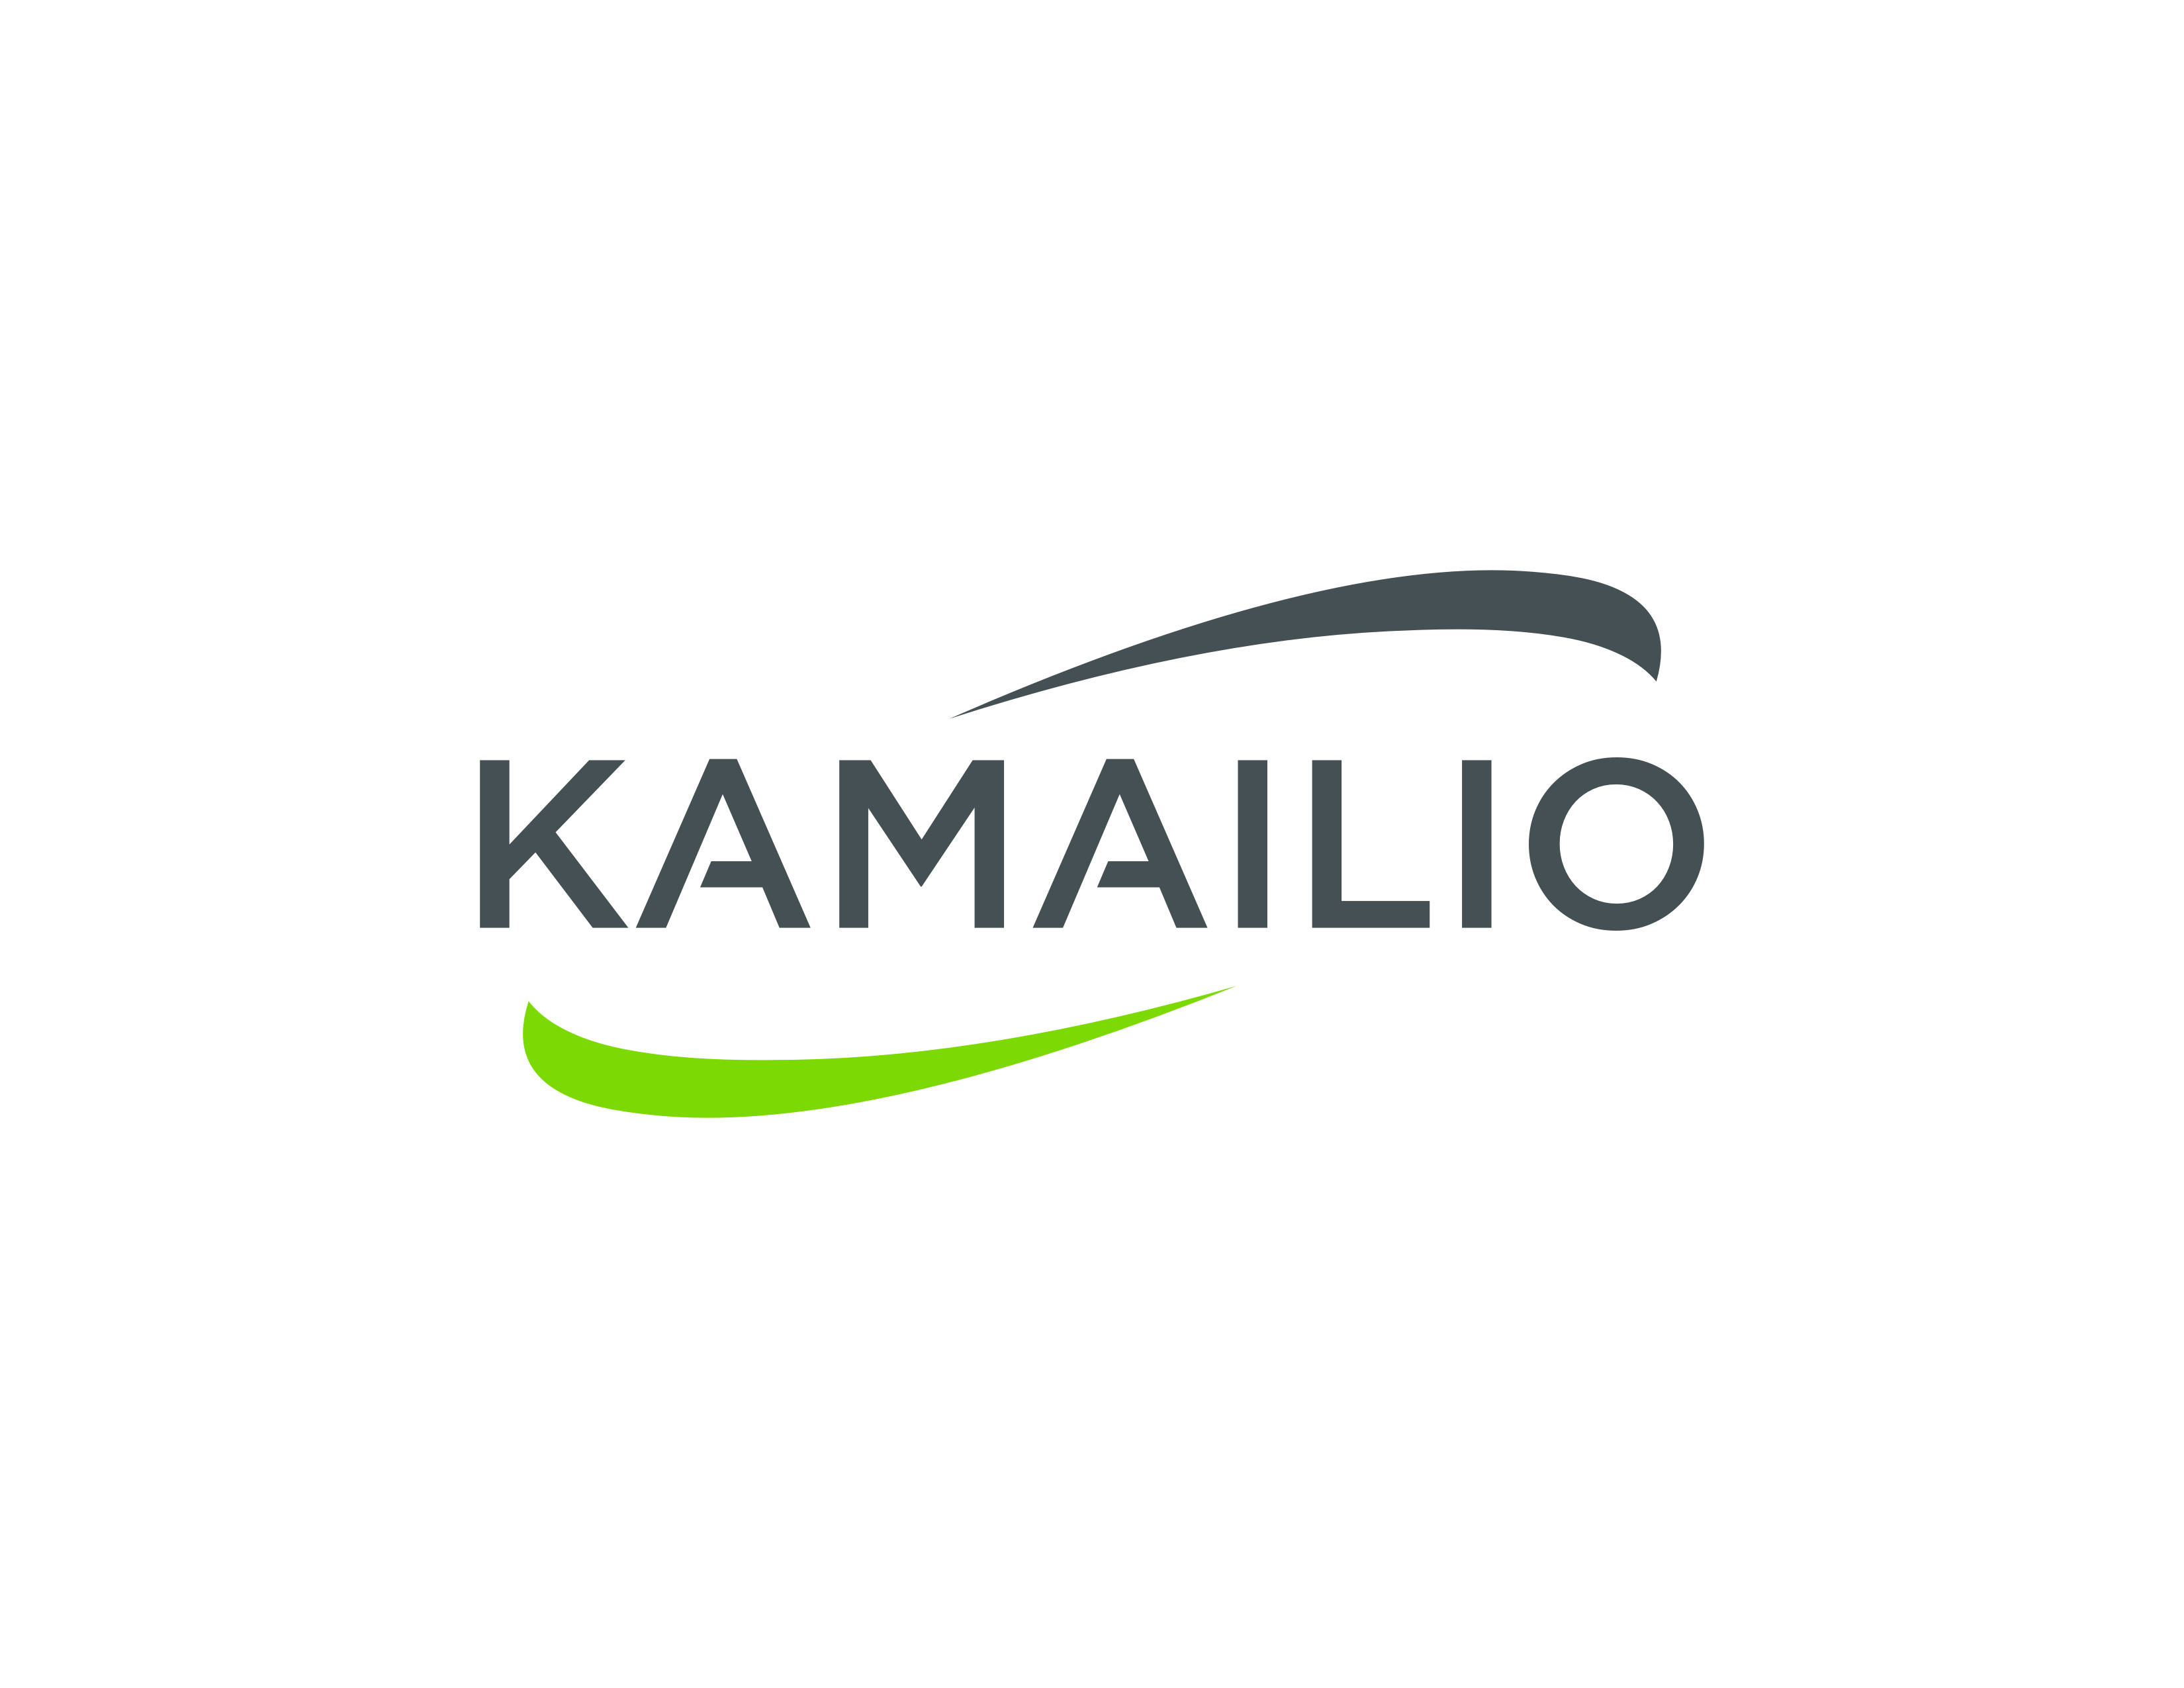 Kamailio Support and Consulting